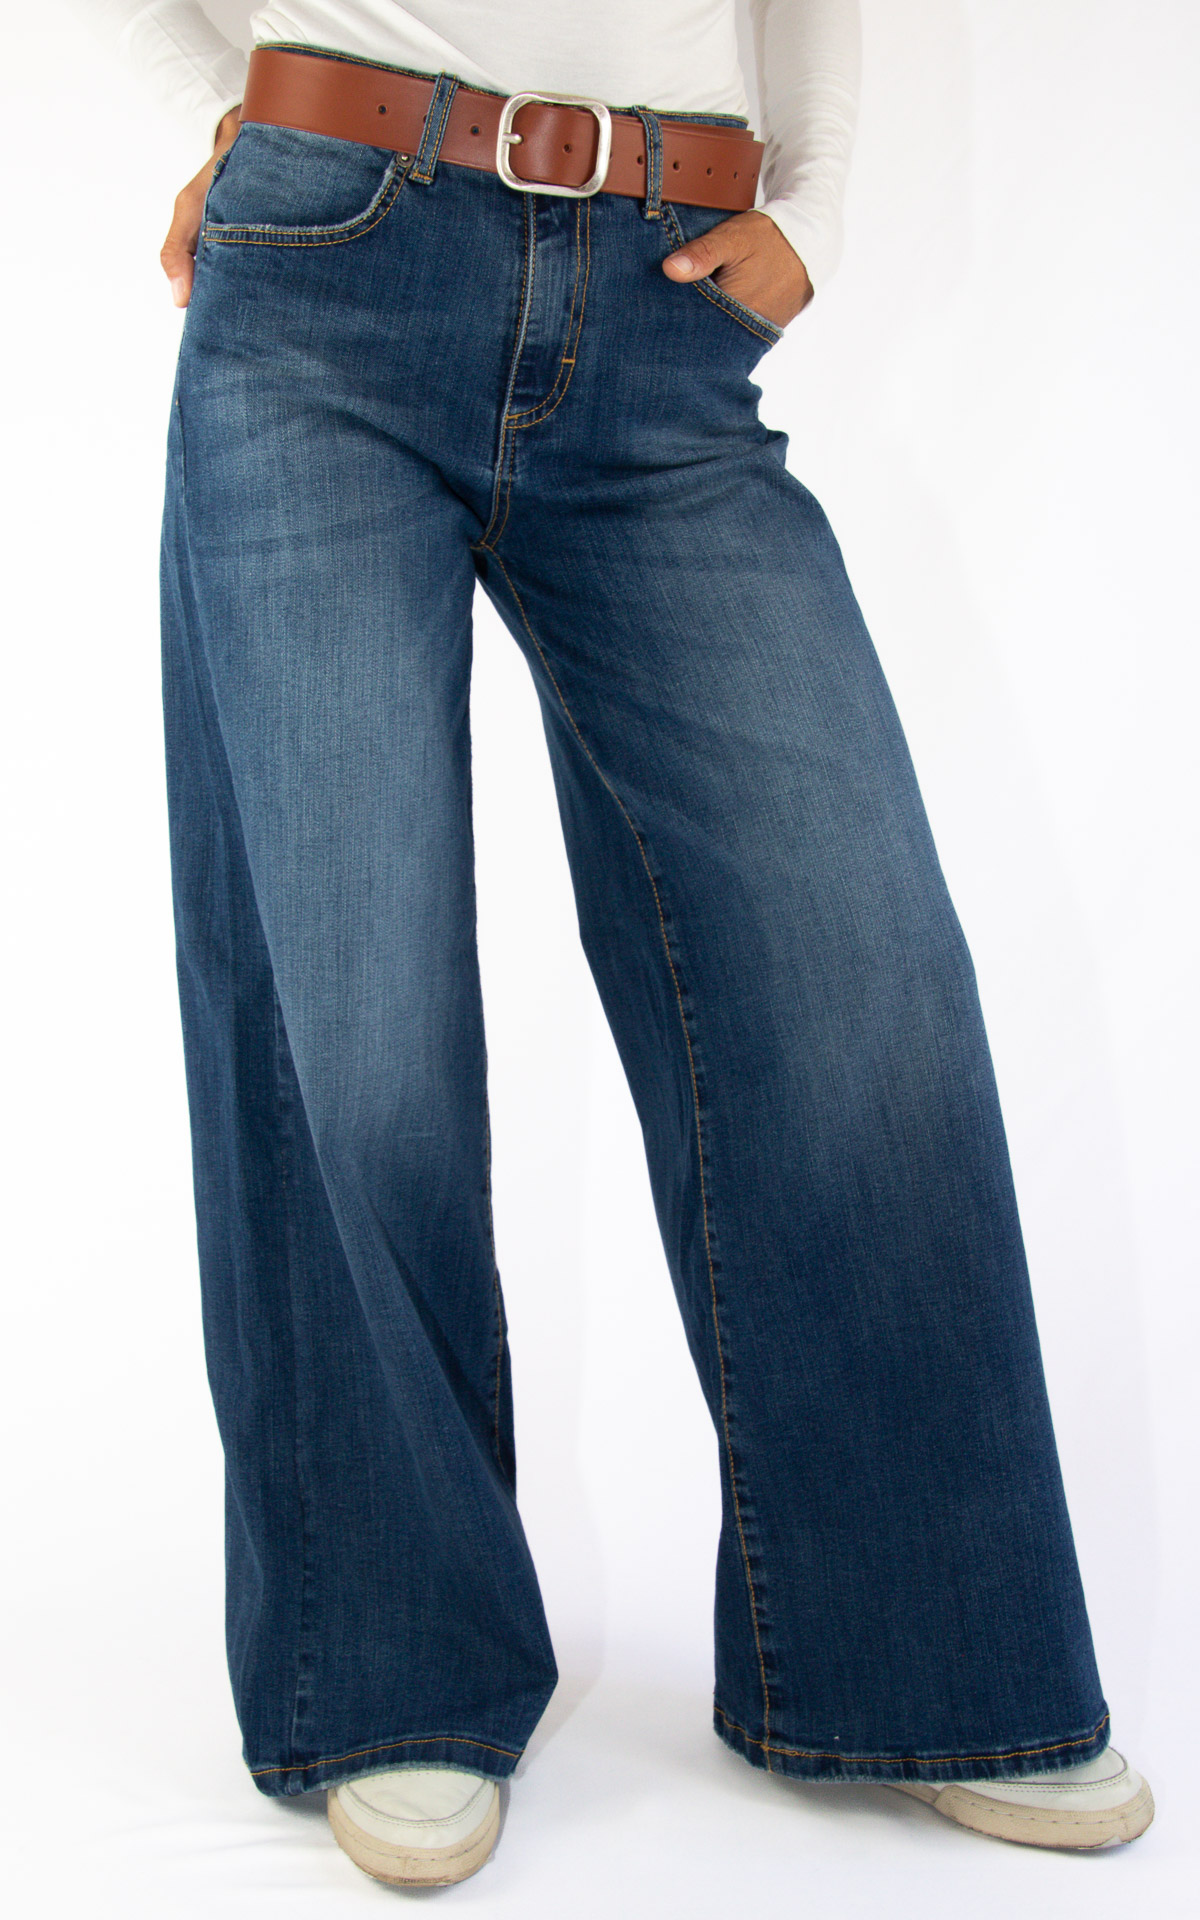 Initial - jeans palazzp - NIA